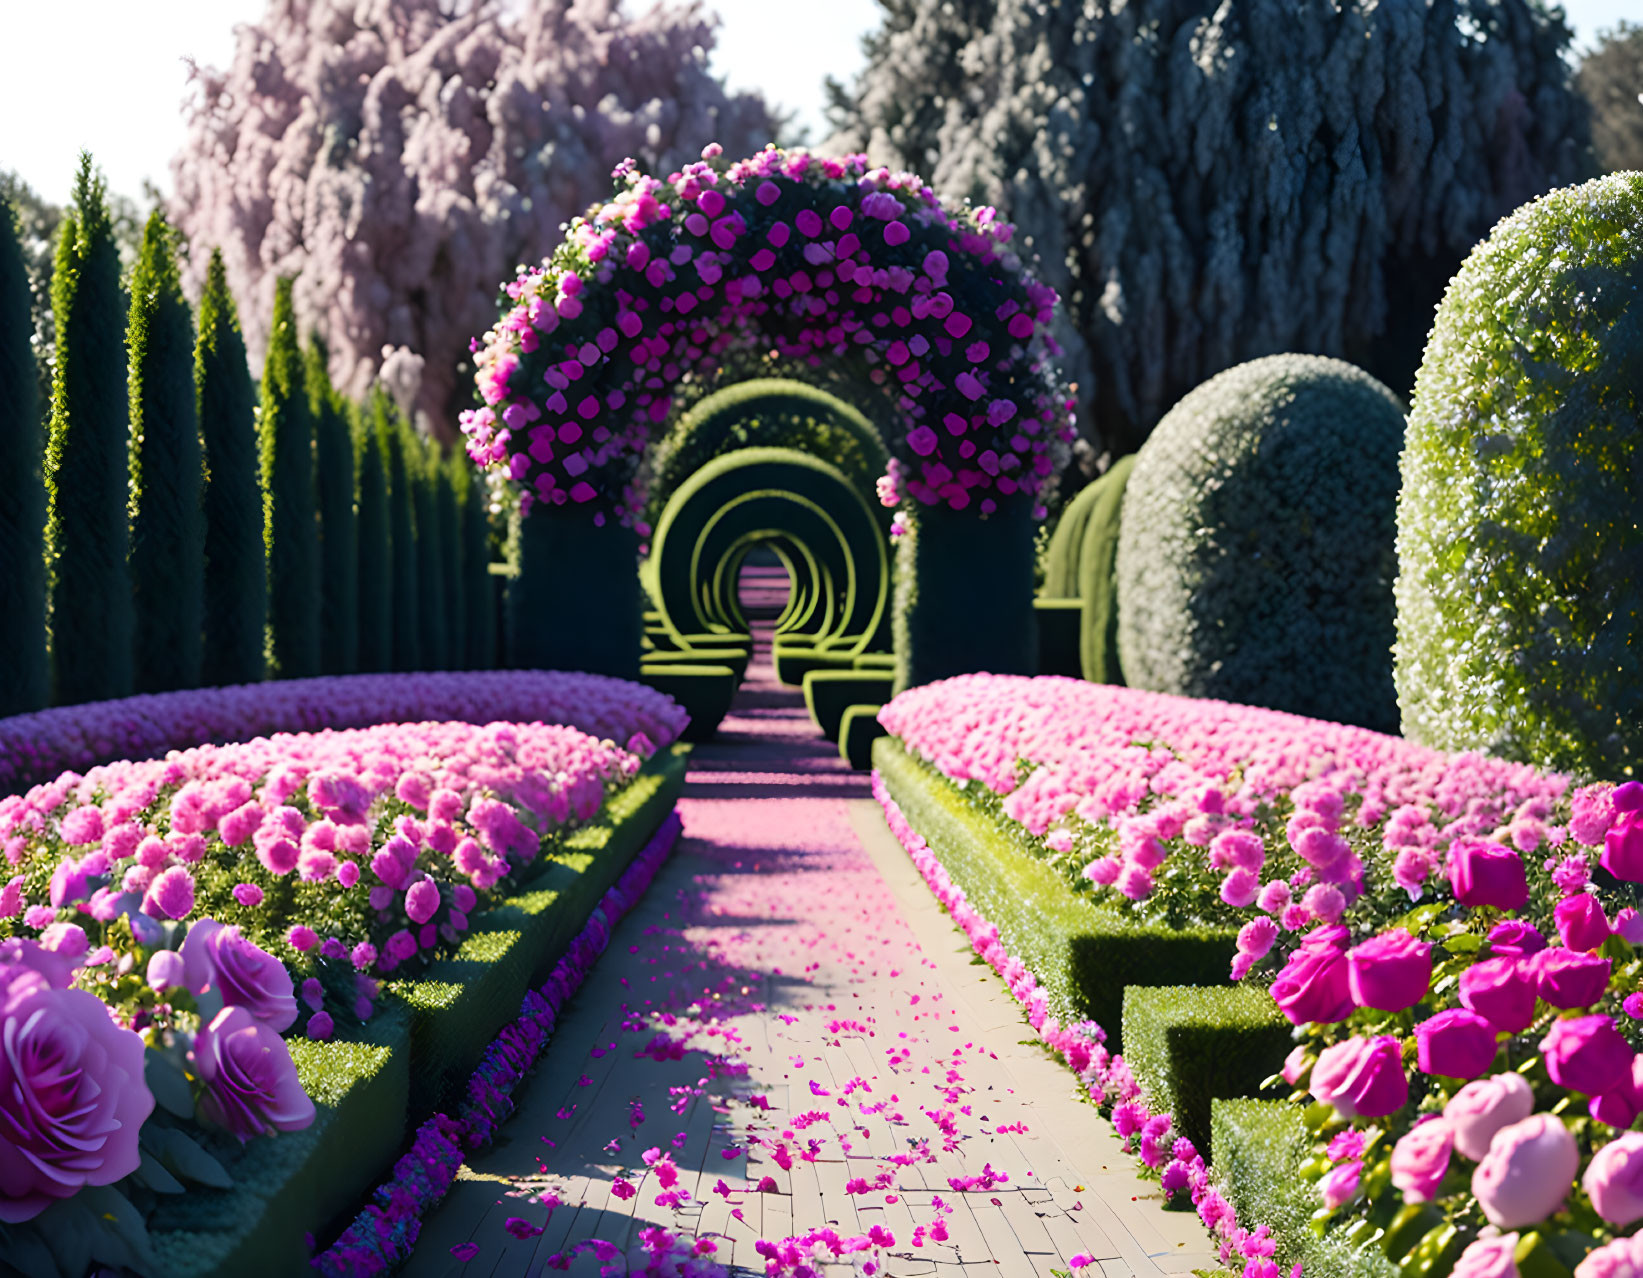 Lush garden pathway with pink flowers and archway surrounded by blooming trees